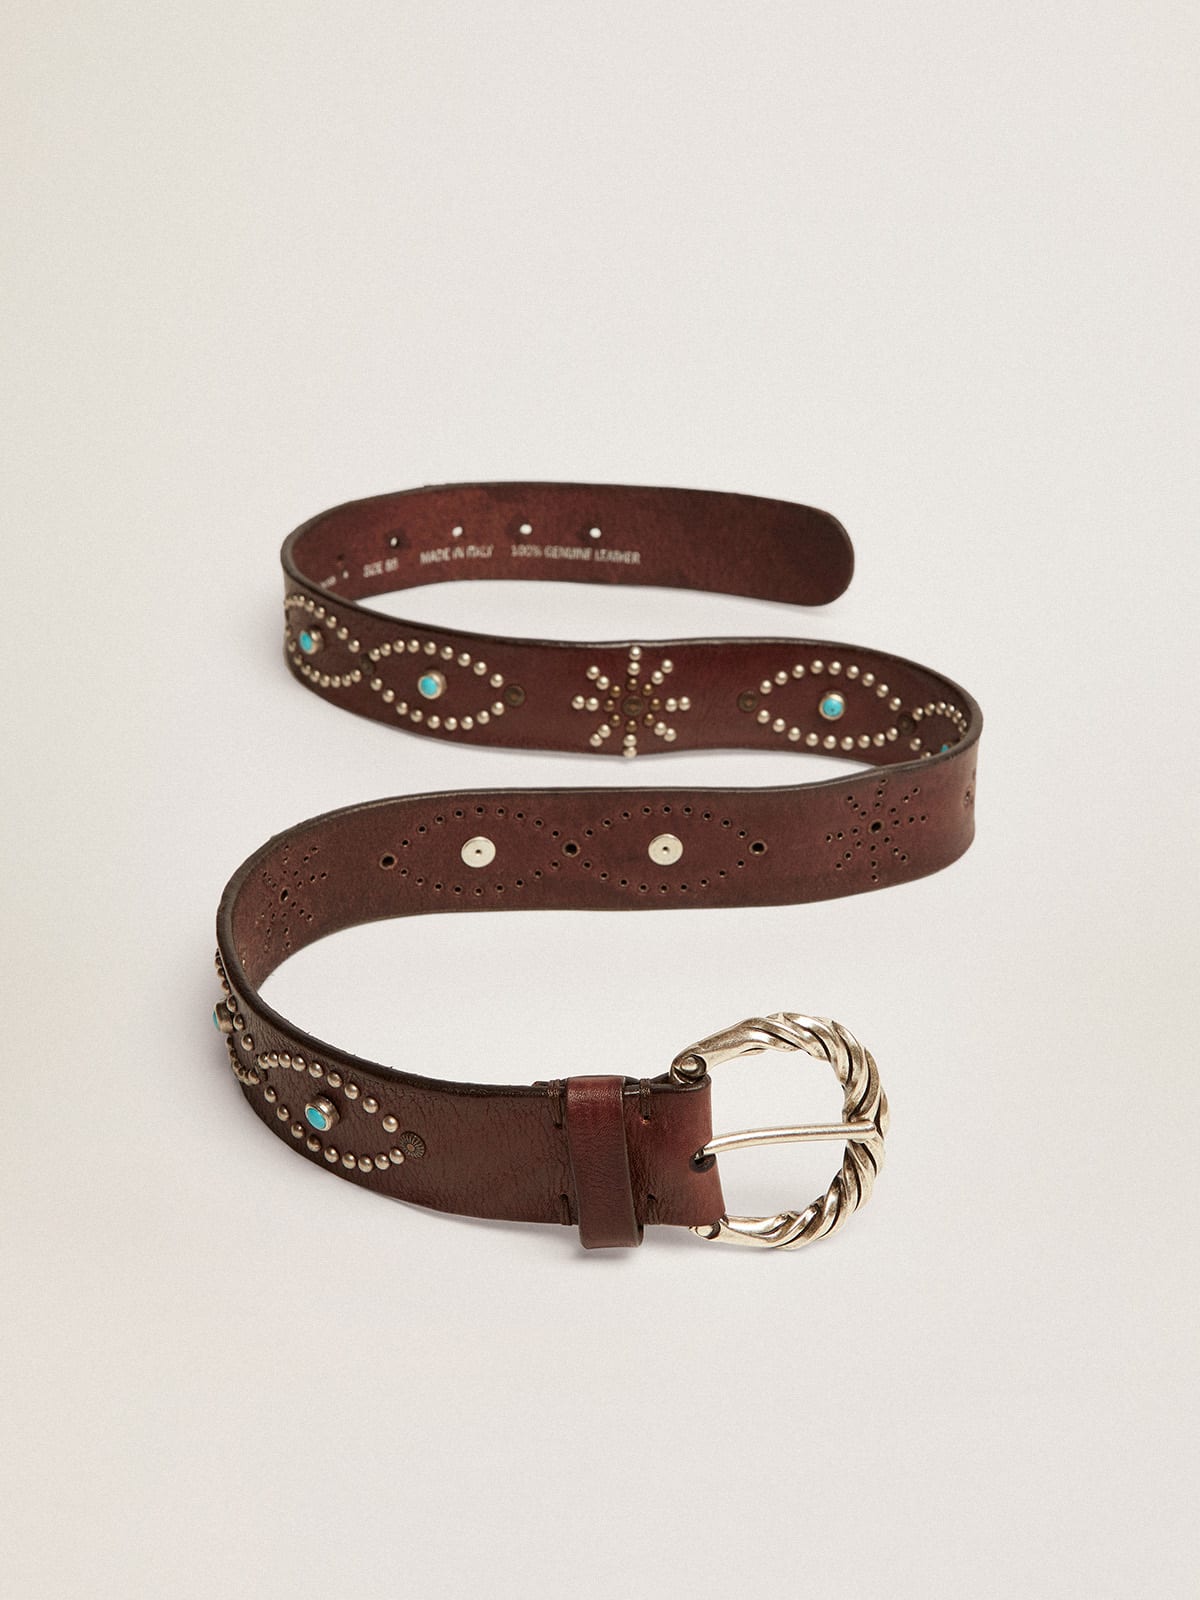 Dallas belt in dark brown leather with colored studs